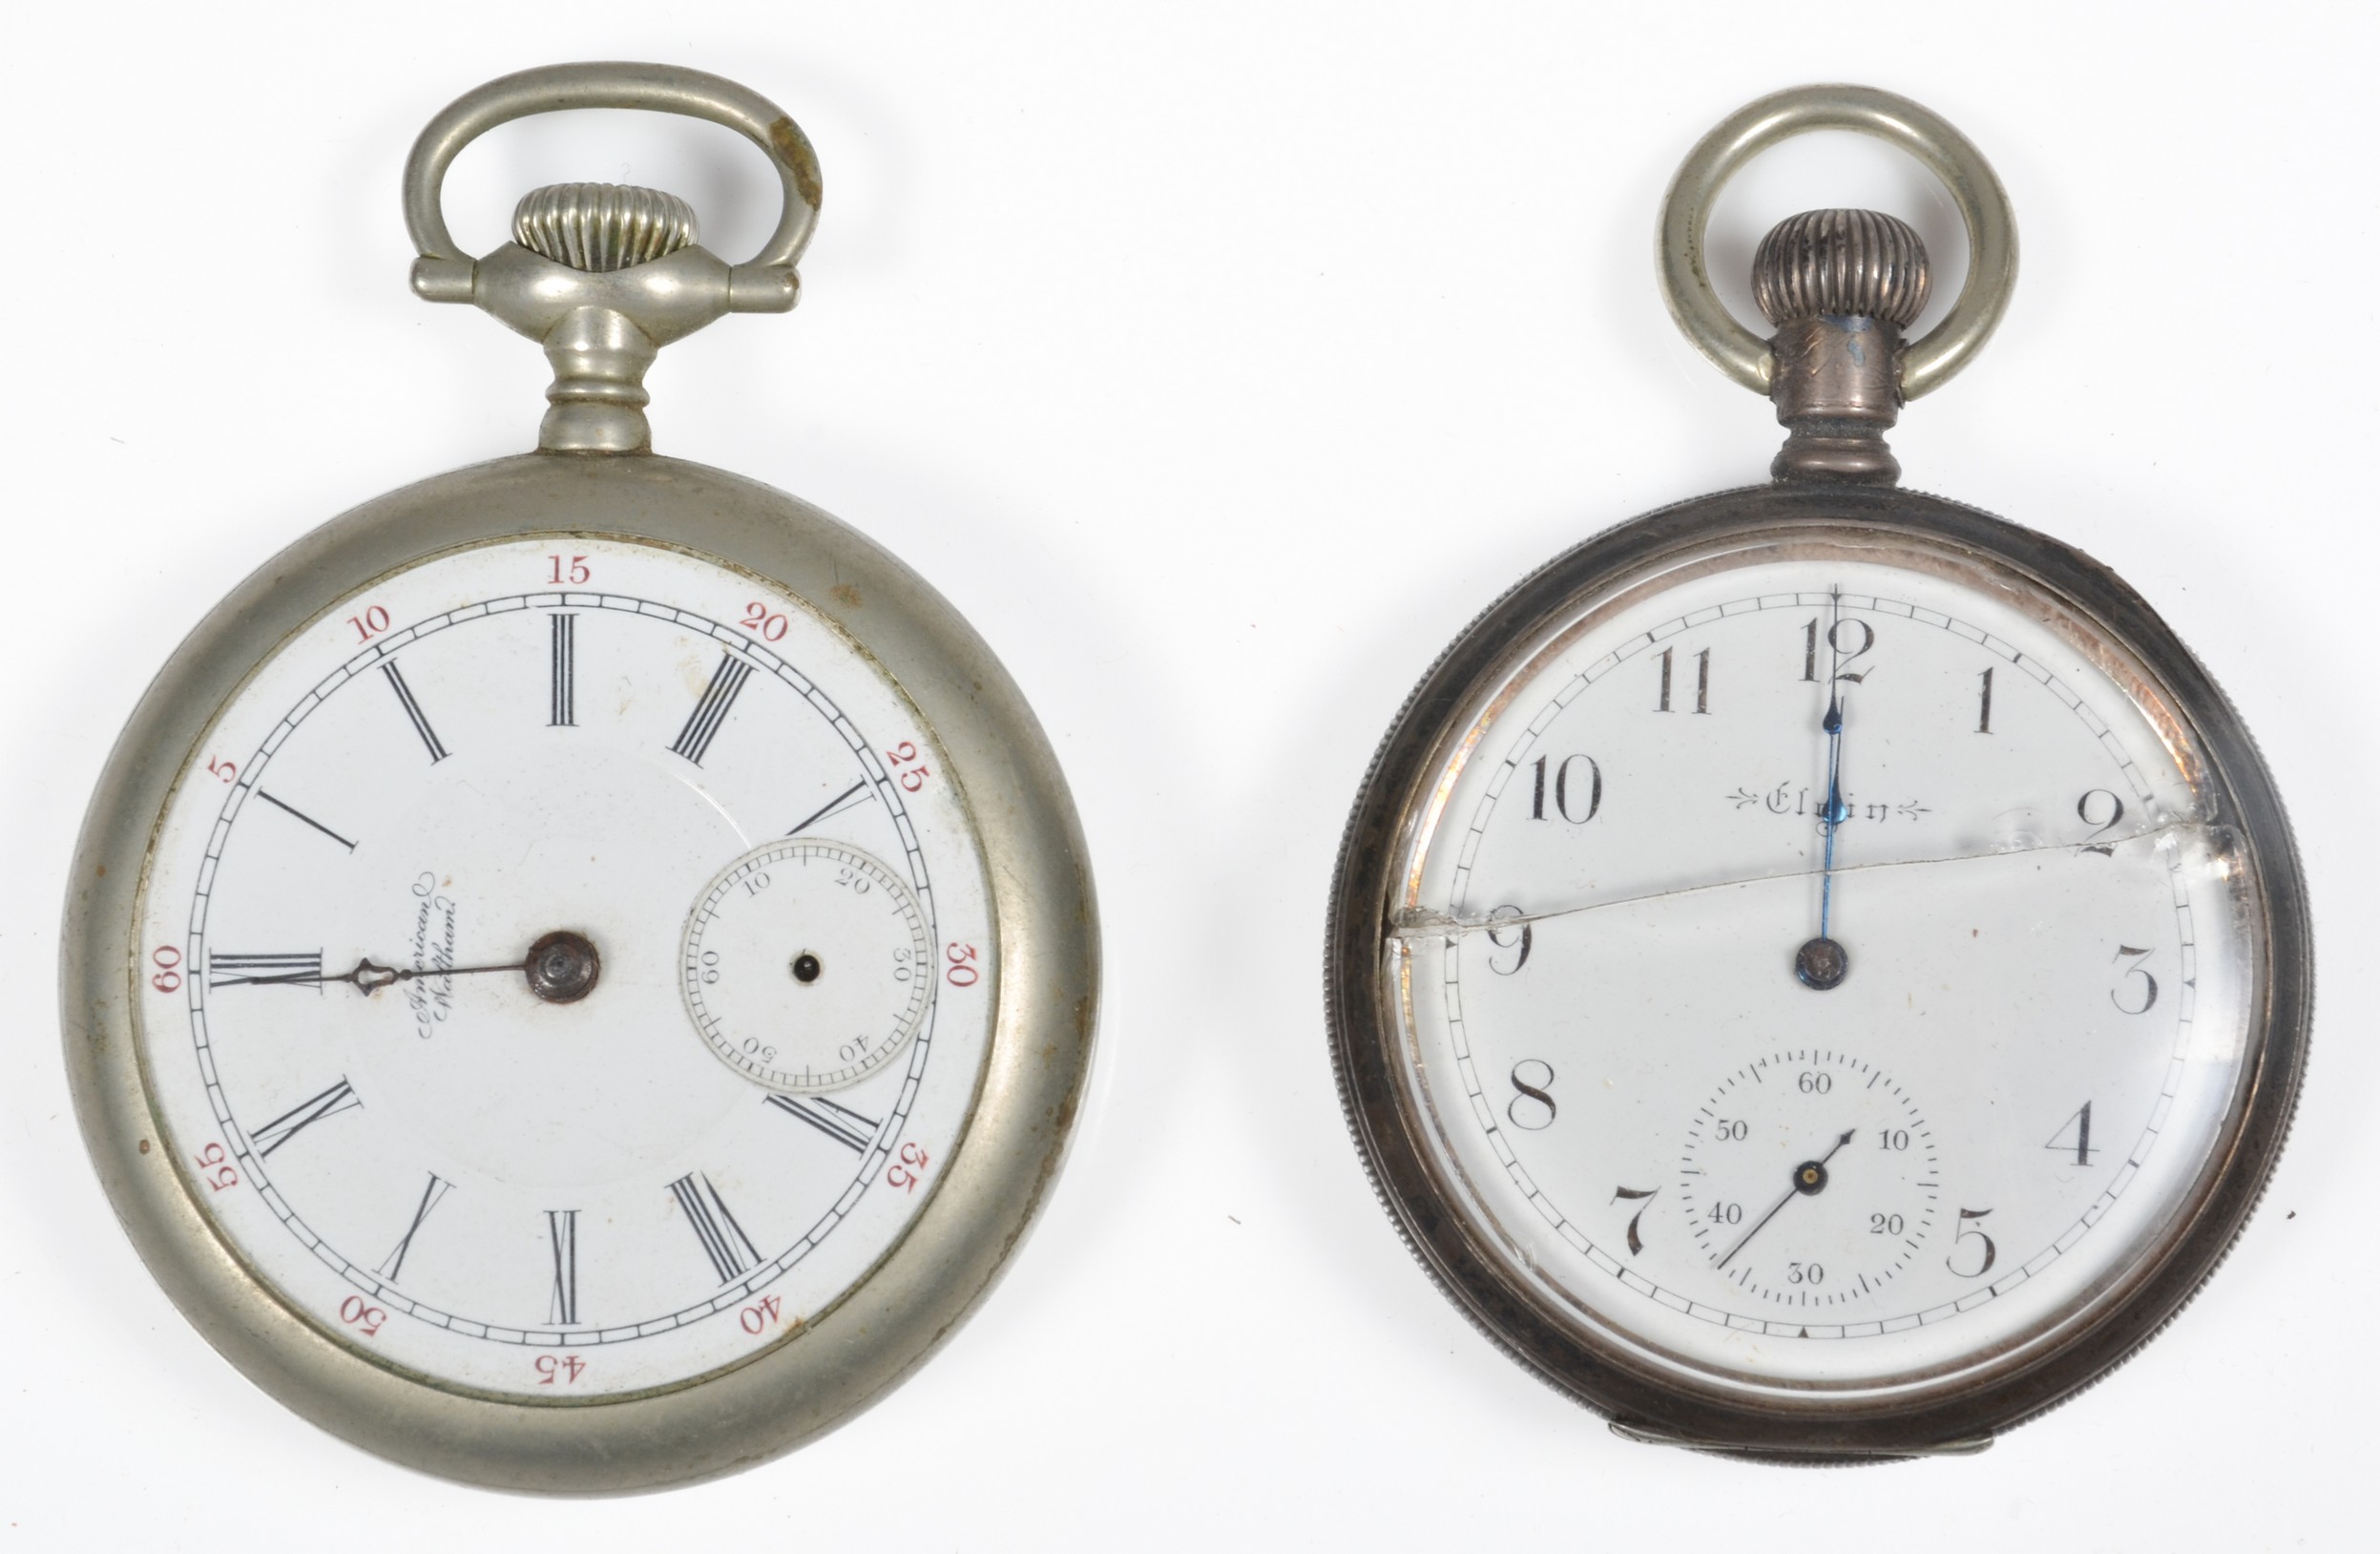  2 OF silver pocket watches to 3b694d